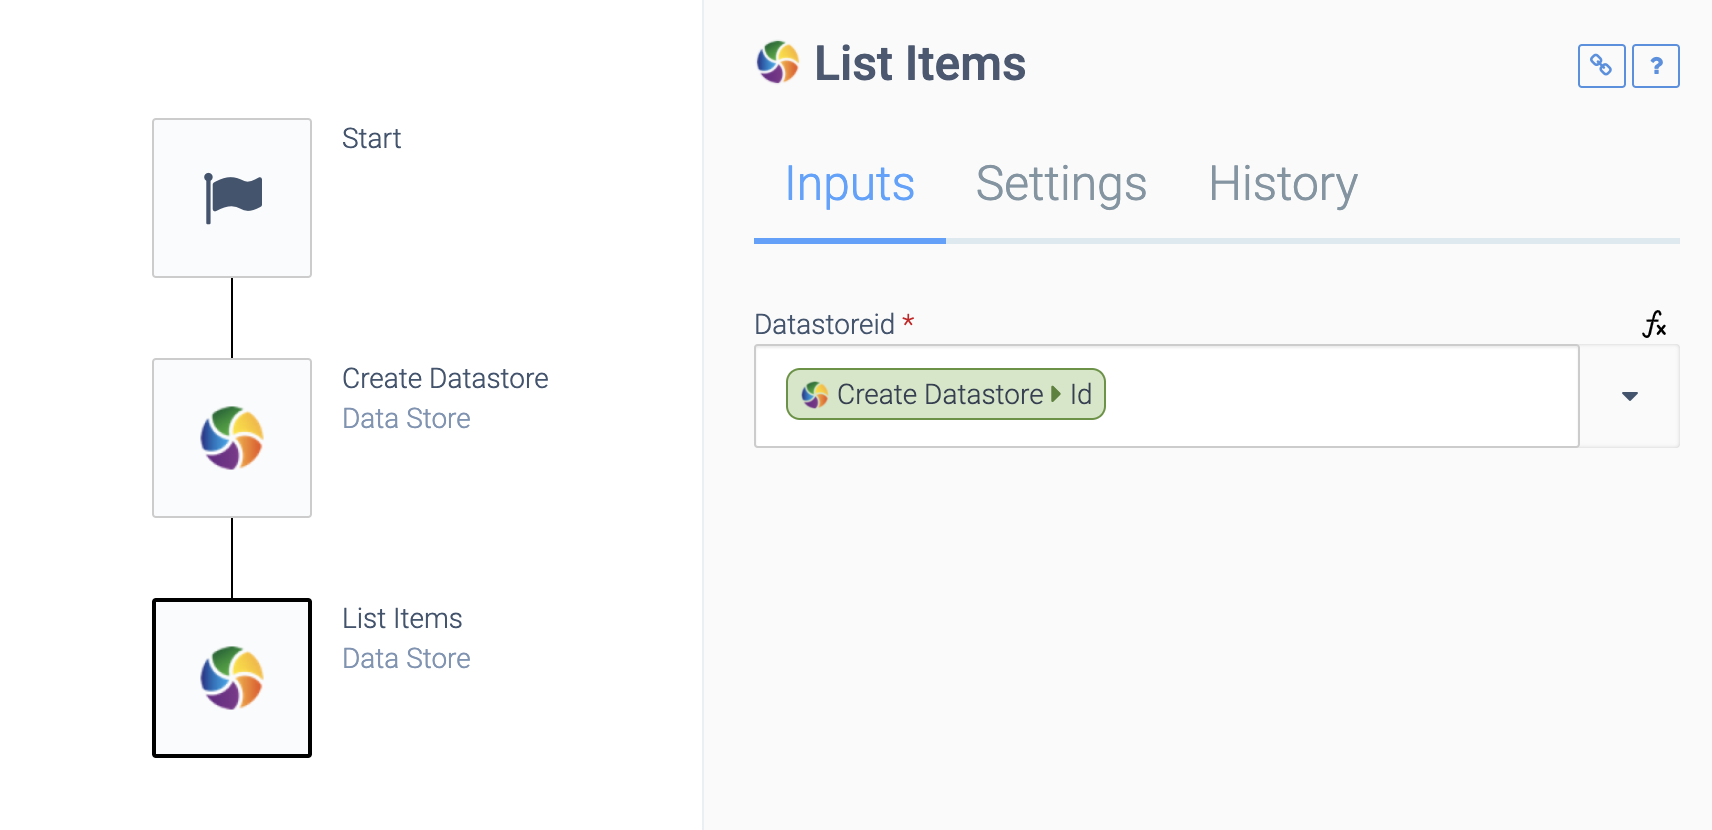 As above, but the List Items block is selected. The Datastoreid field is set to Create Datastore > Id.